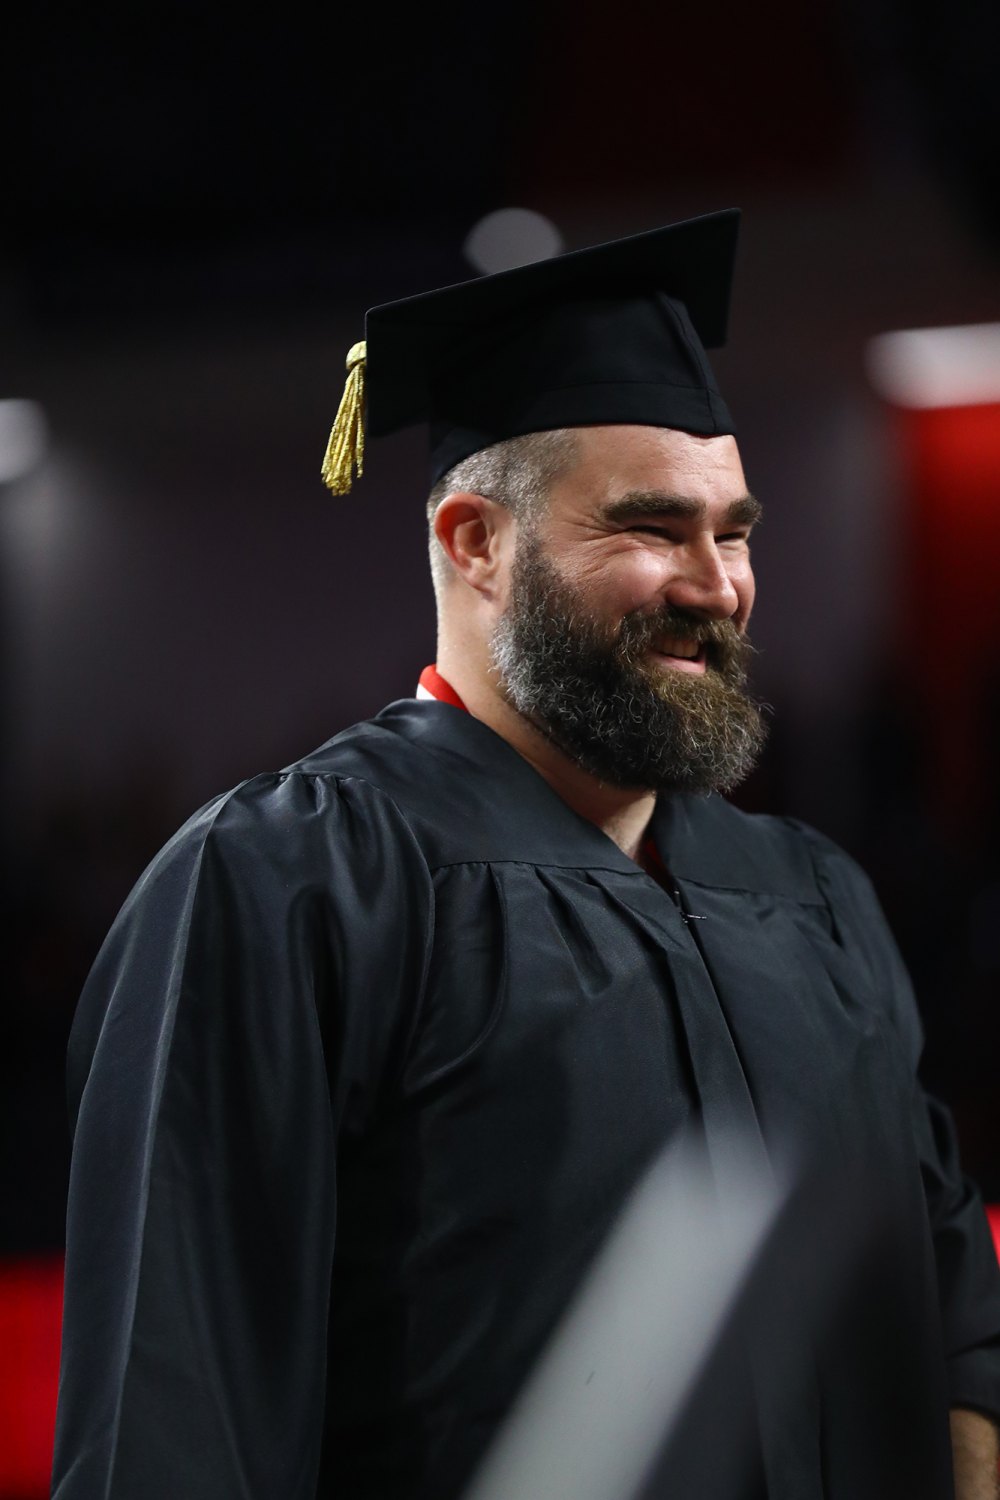 Travis and Jason Kelce End ‘New Heights’ Live With University of Cincinnati Graduation Ceremony